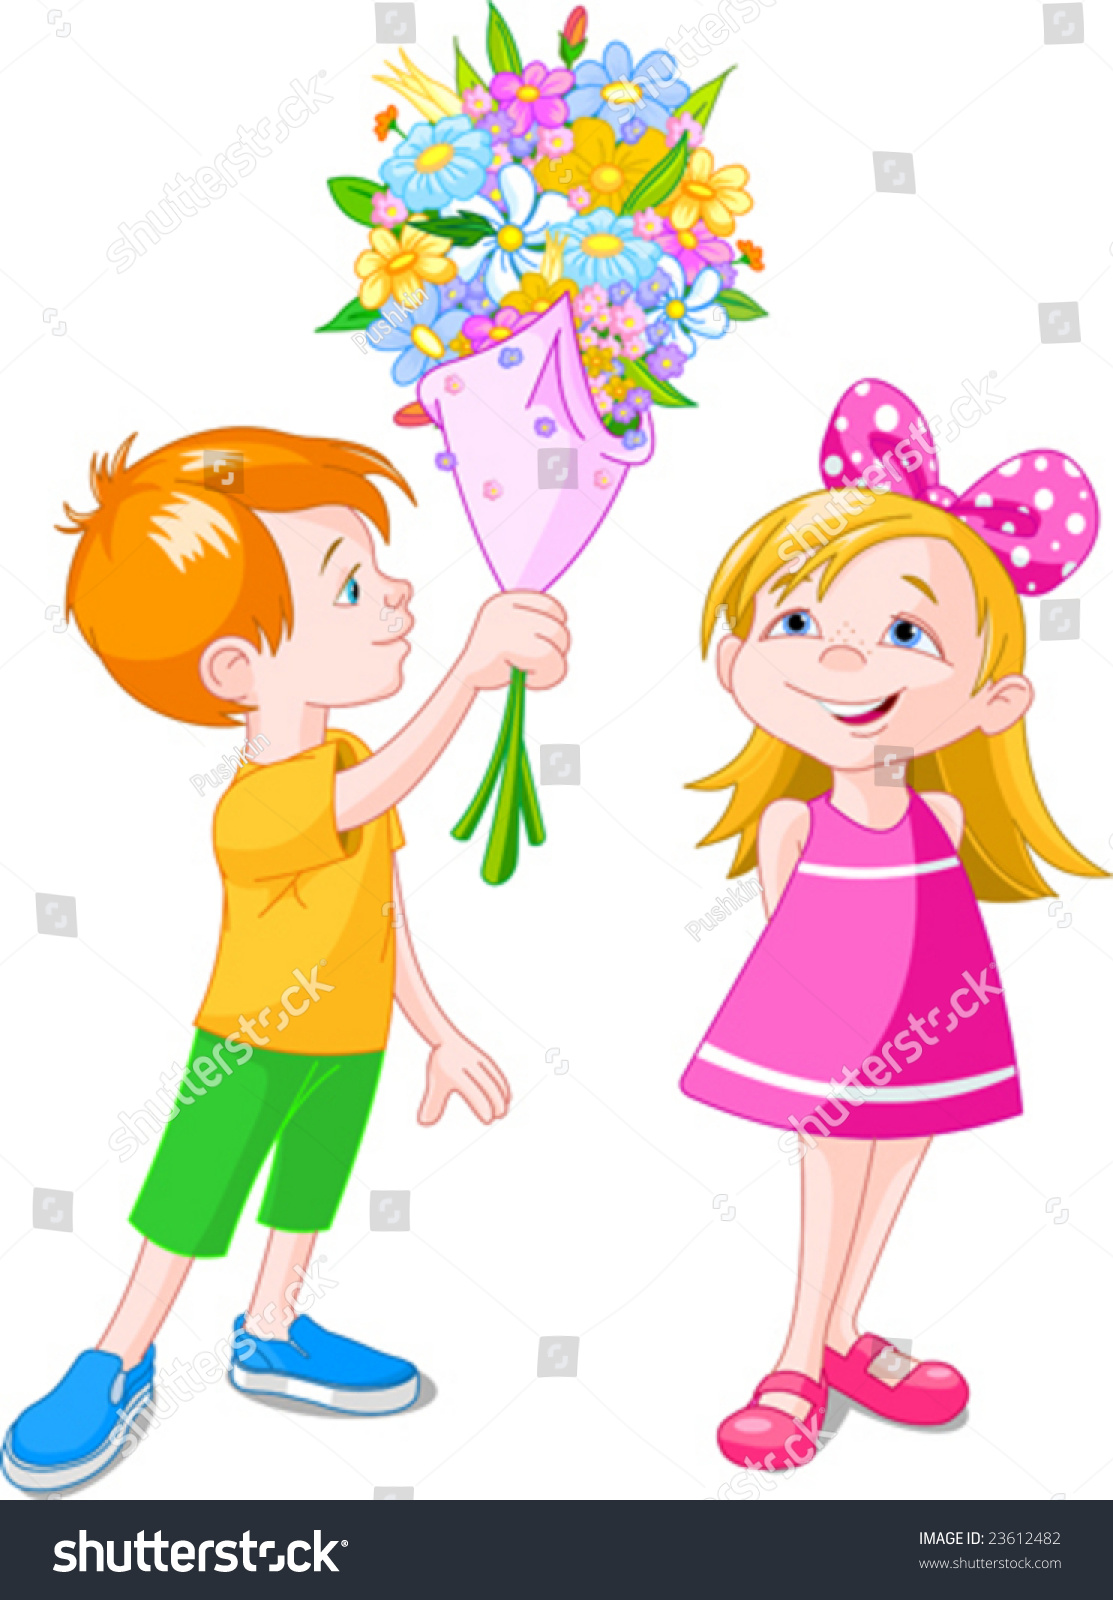 Boy Giving A Bouquet To Girl. Vector Illustration - 23612482 : Shutterstock